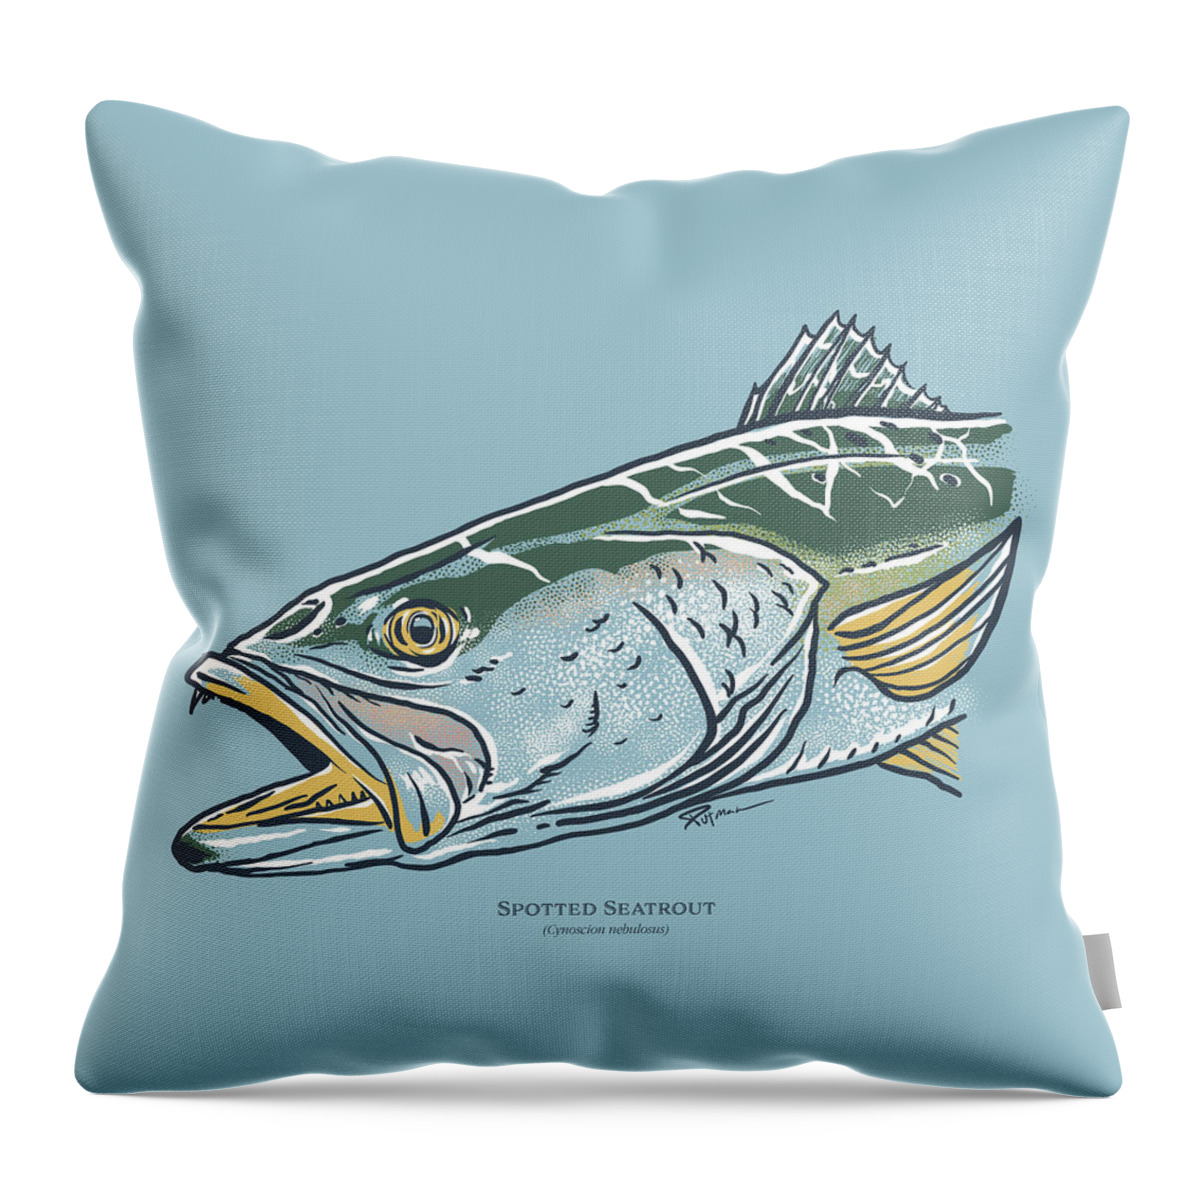 Spotted Seatrout Throw Pillow featuring the digital art Spotted Seatrout by Kevin Putman